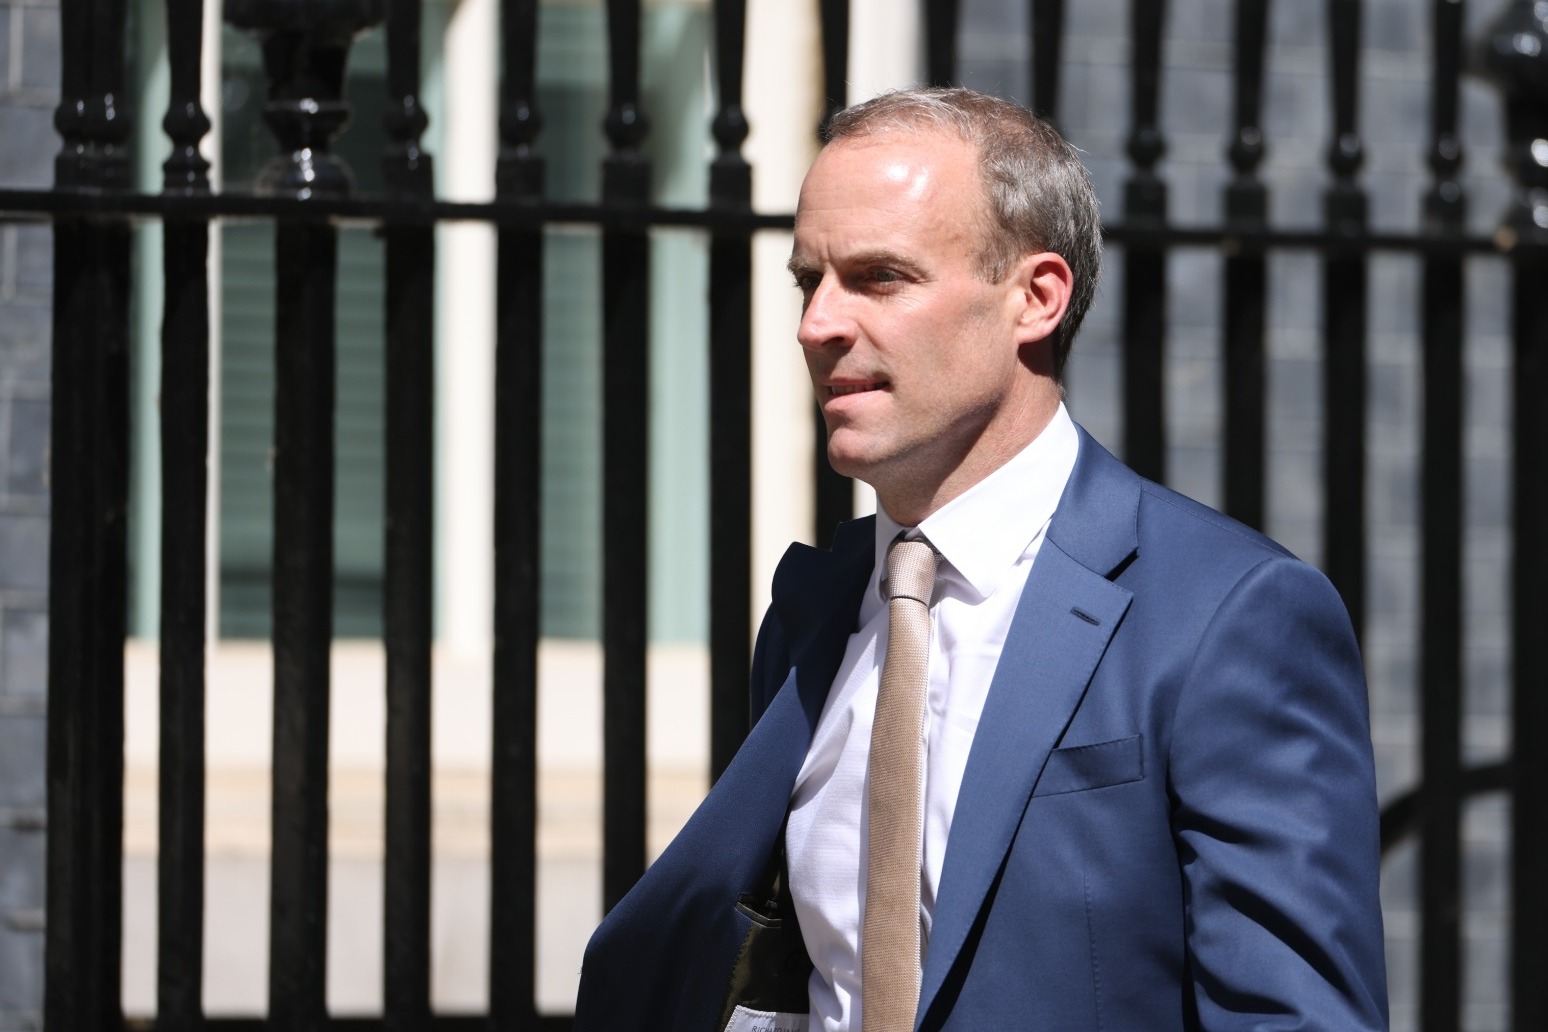 Raab: Emergency budget plans from Truss risk being Tory electoral suicide note 